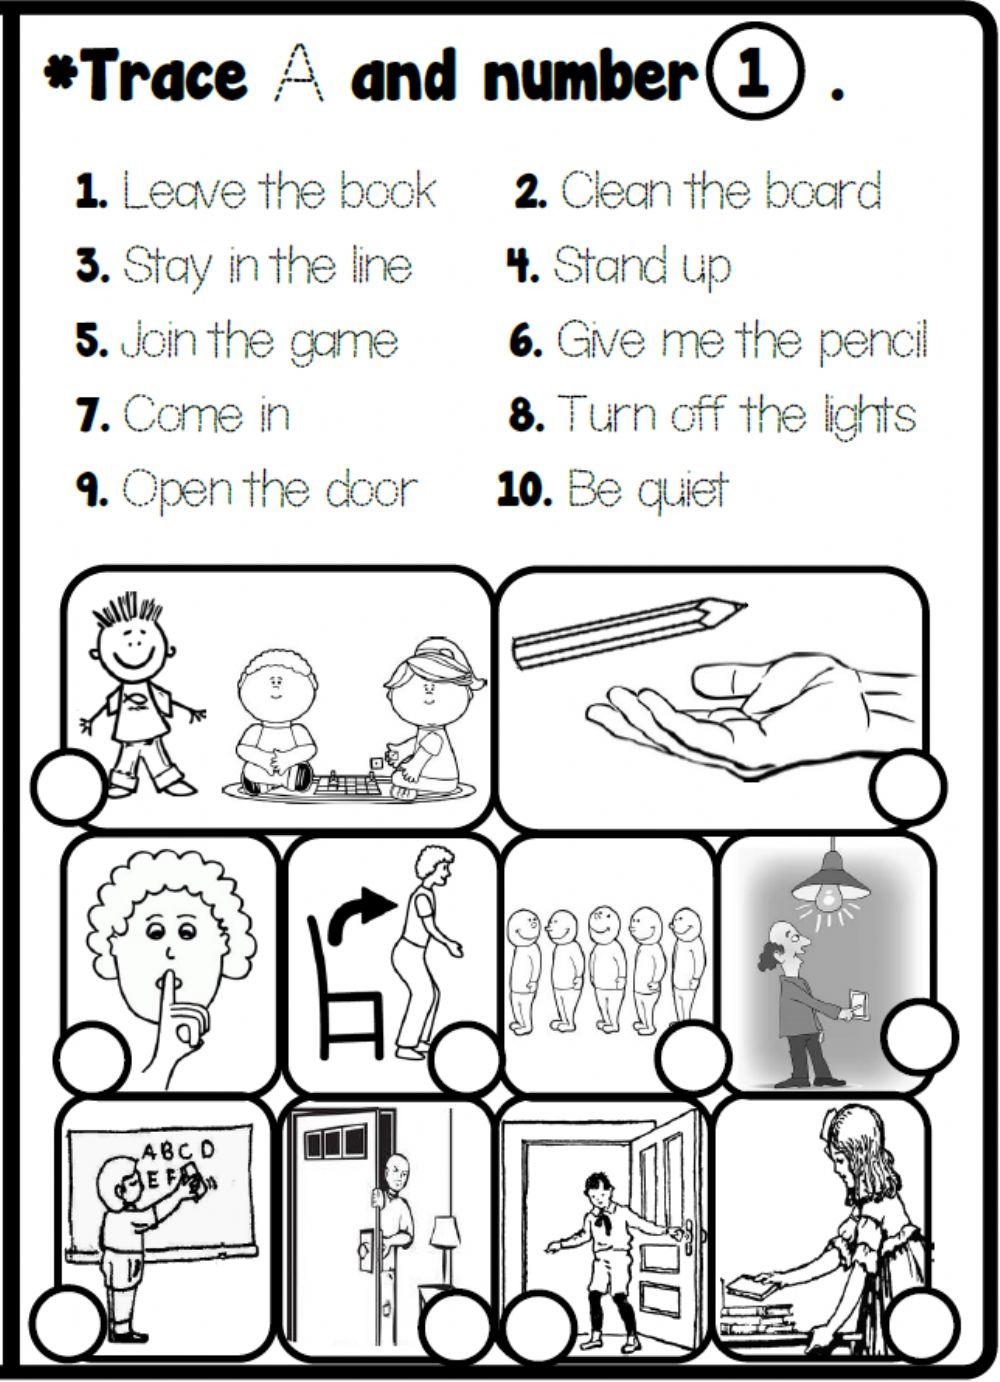 4.1. Classroom Rules - Look and Number